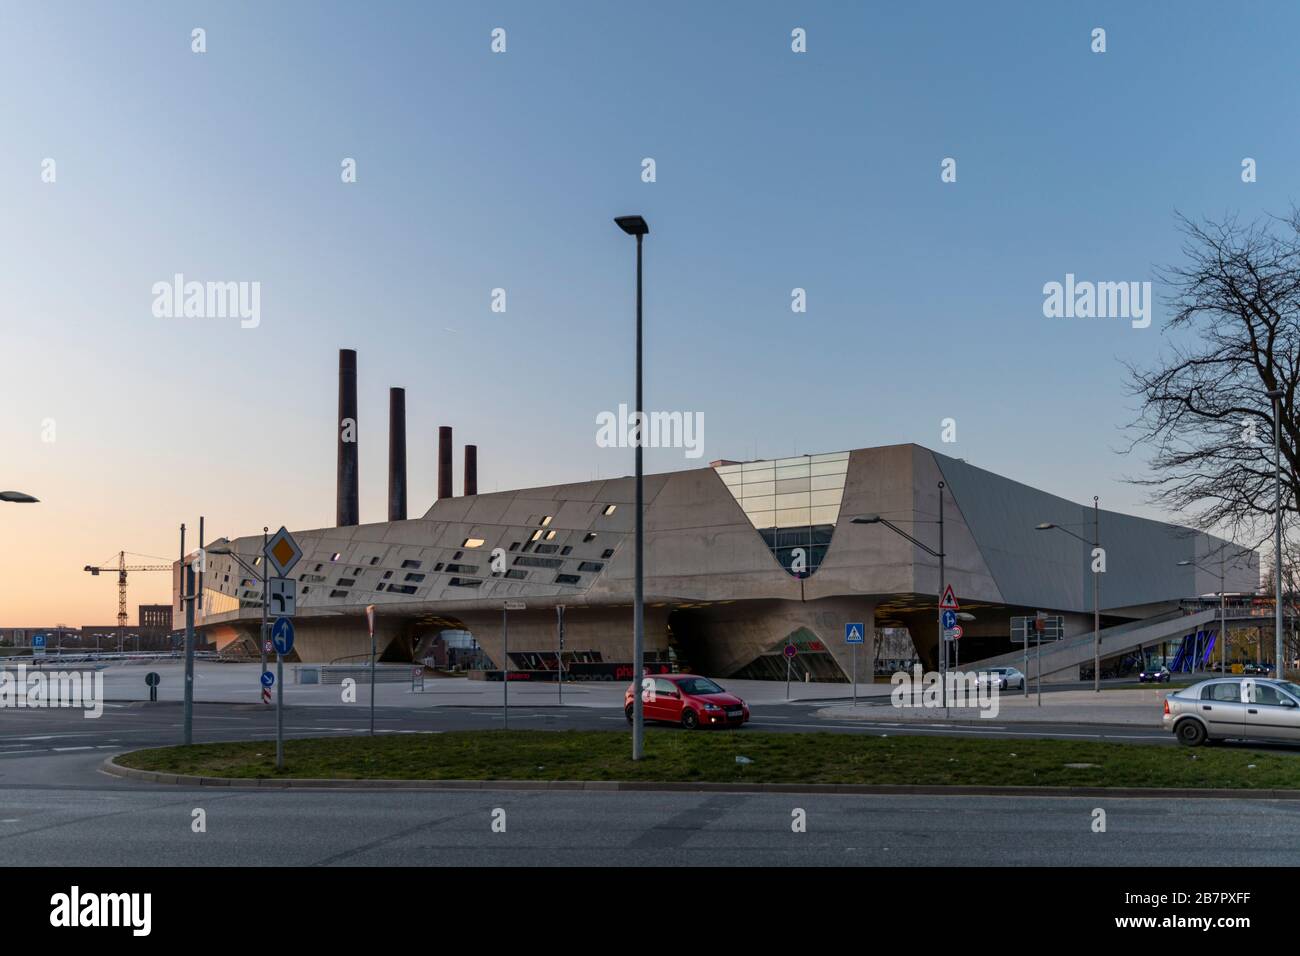 Science center Phaeno is attracting visitors to its changing exhibitions. Center is located conveniently next to Wolfsburg railway station. Stock Photo